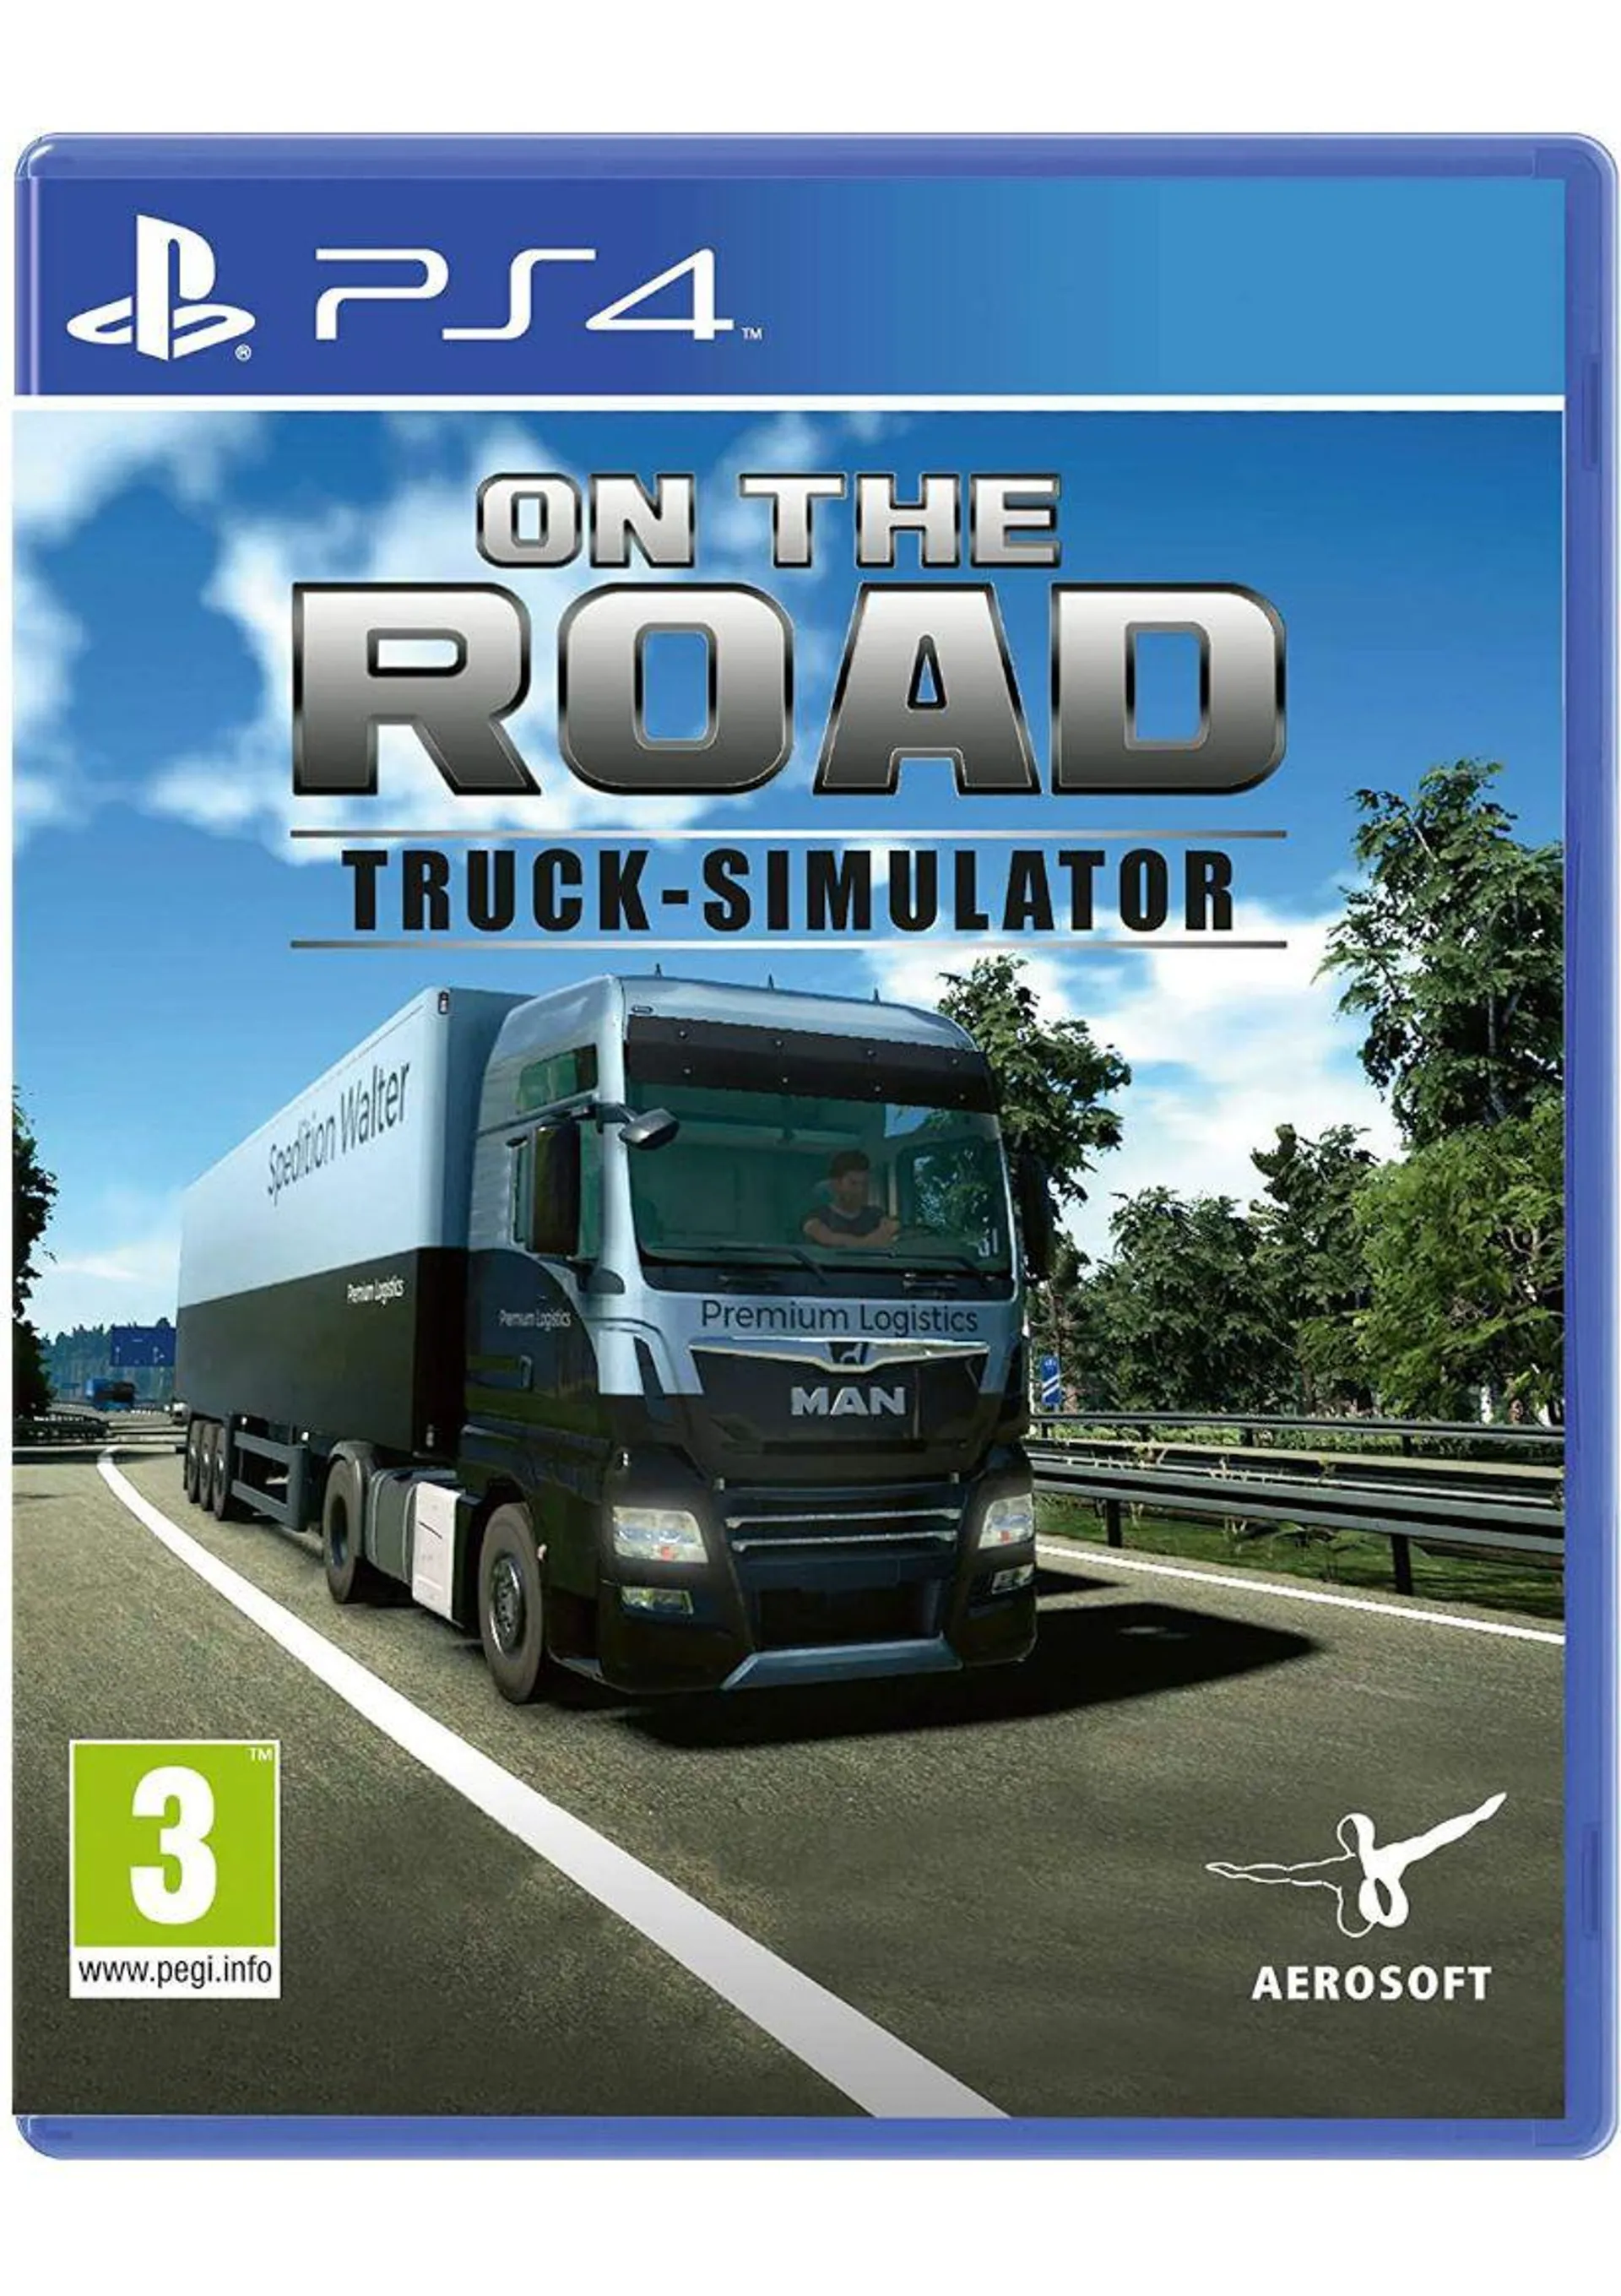 On The Road on PlayStation 4